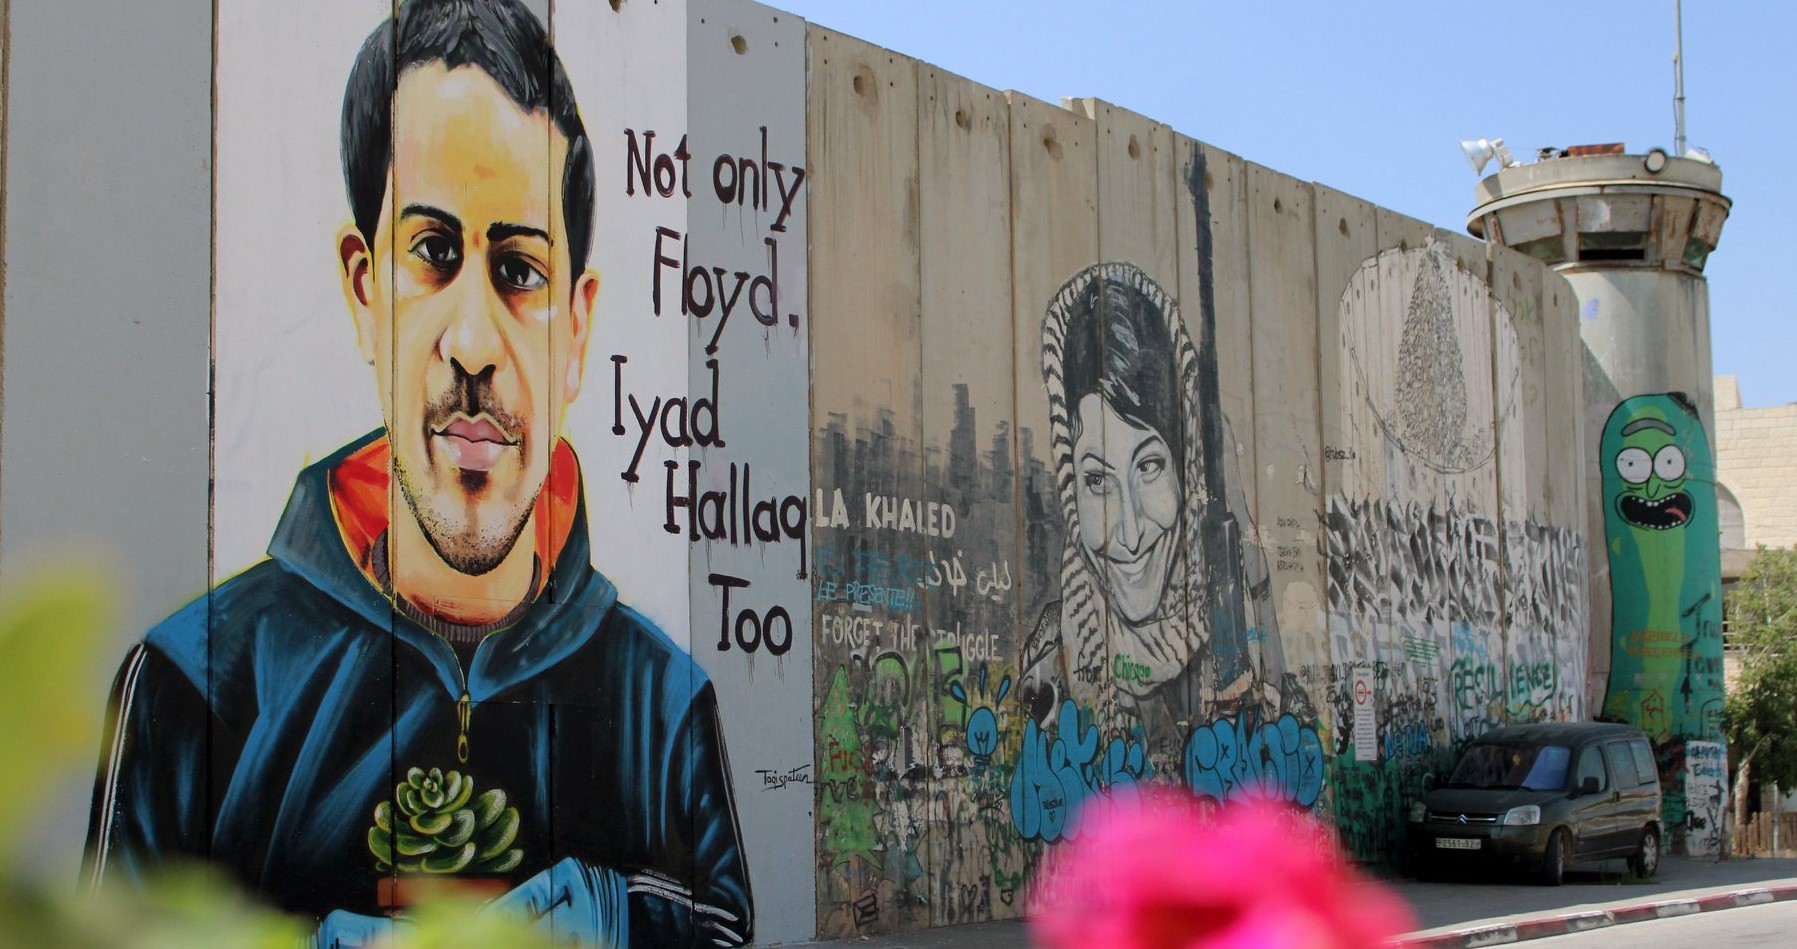 "Not only Floyd, Iyad Hallaq Too," a portrait of the 32-year-old autistic Palestinian man killed by Israeli police in occupied East Jerusalem in May 2020, rendered on Israel's "Apartheid Wall" separating Jerusalem and Bethlehem.